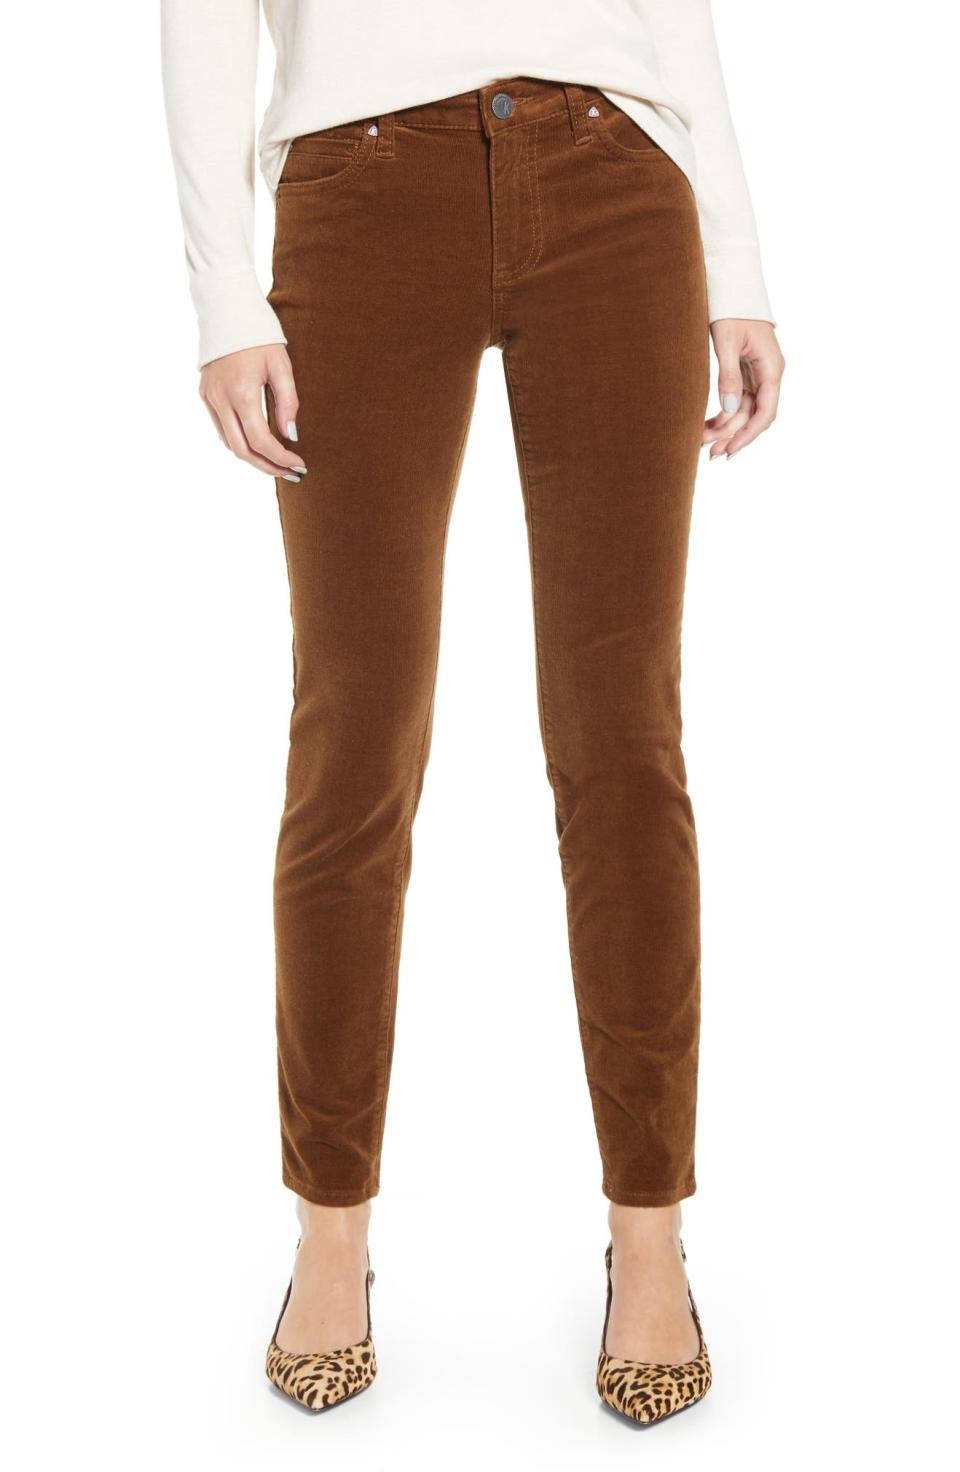 Kut From the Kloth Diana Stretch Corduroy Skinny Pants. Image via Nordstrom.